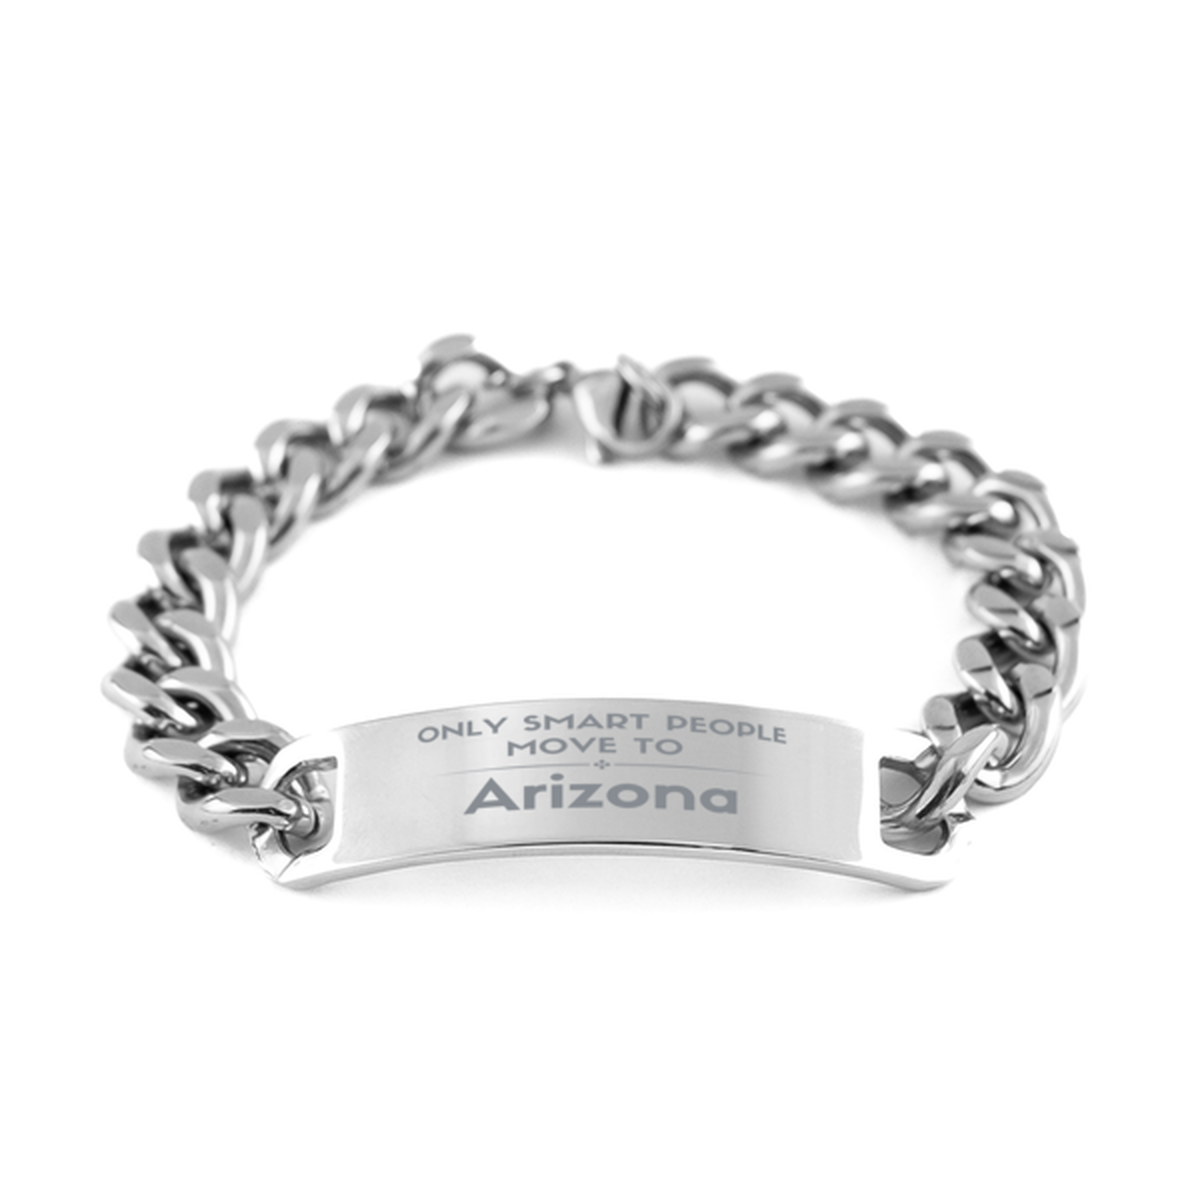 Only smart people move to Arizona Cuban Chain Stainless Steel Bracelet, Gag Gifts For Arizona, Move to Arizona Gifts for Friends Coworker Funny Saying Quote